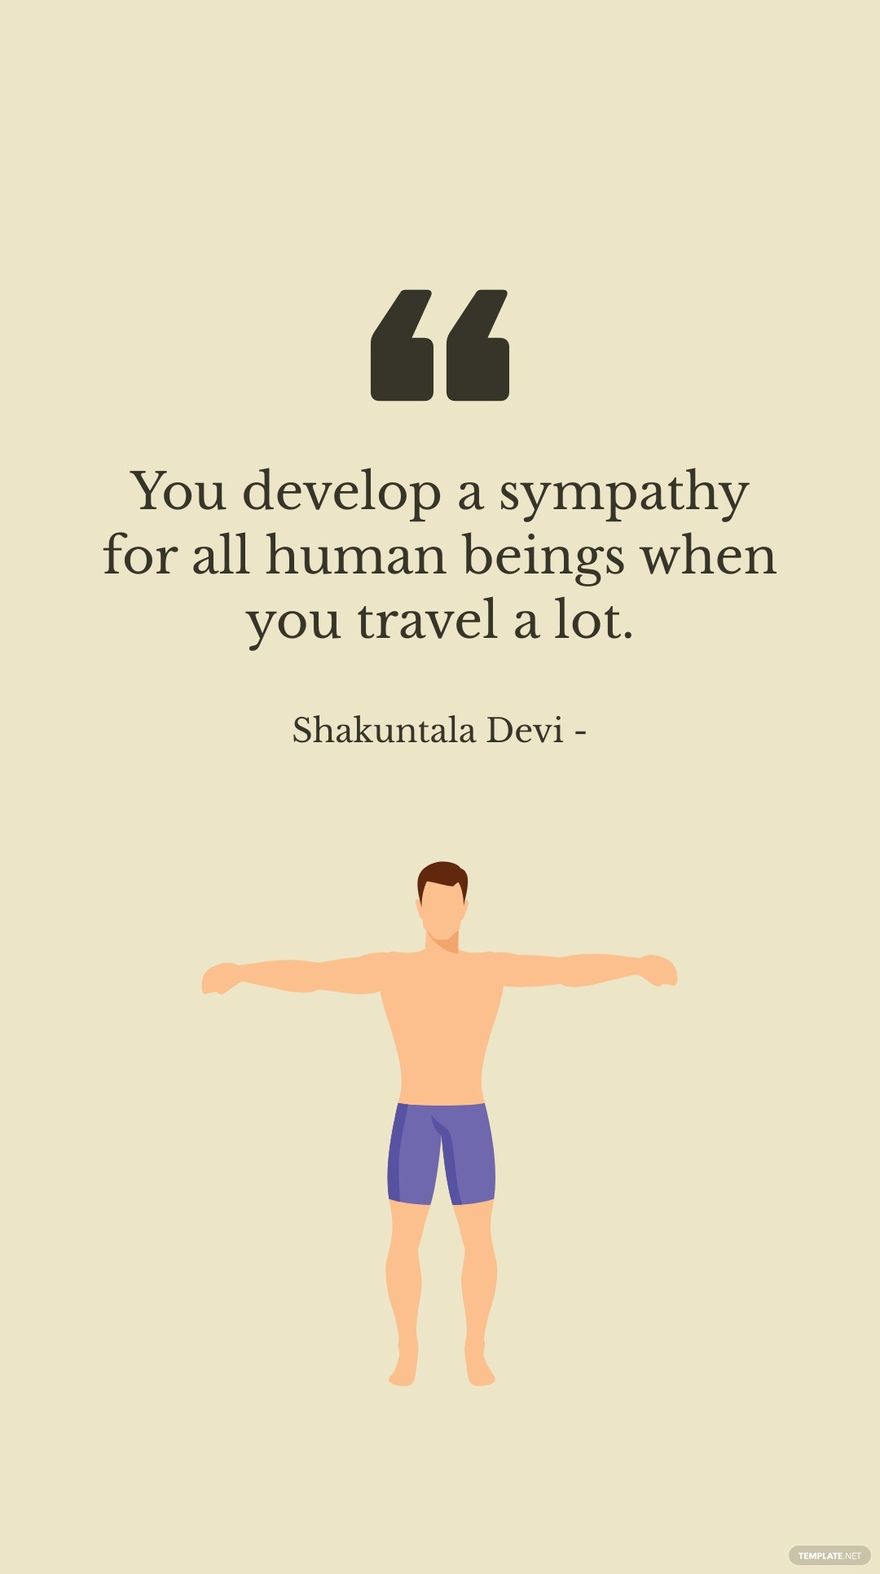 Free Shakuntala Devi - You develop a sympathy for all human beings when you travel a lot. in JPG